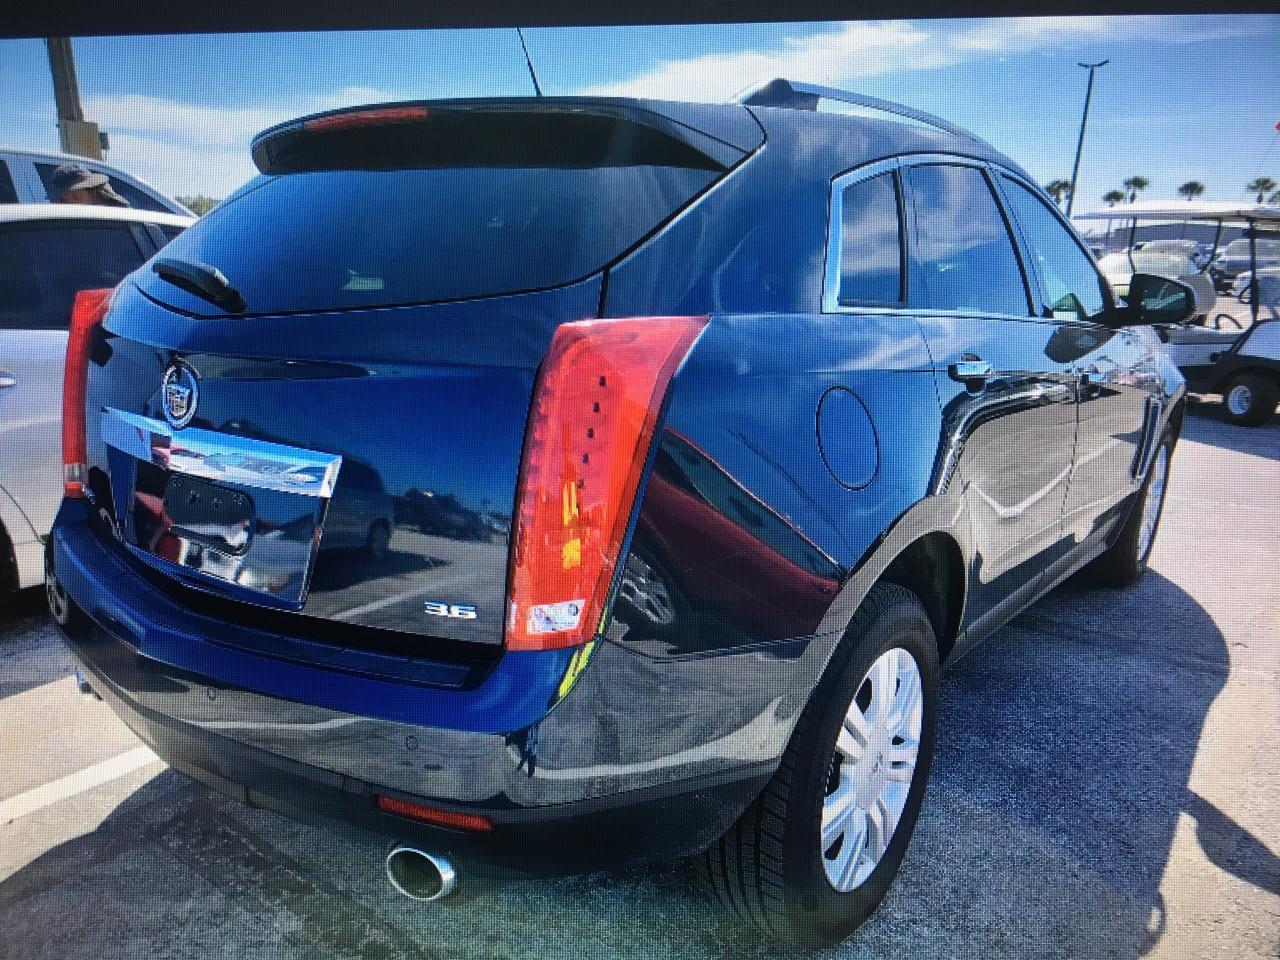 2015 Cadillac SRX Rust Free Florida SUV - FWD 4dr Luxury Collection - Photo #1